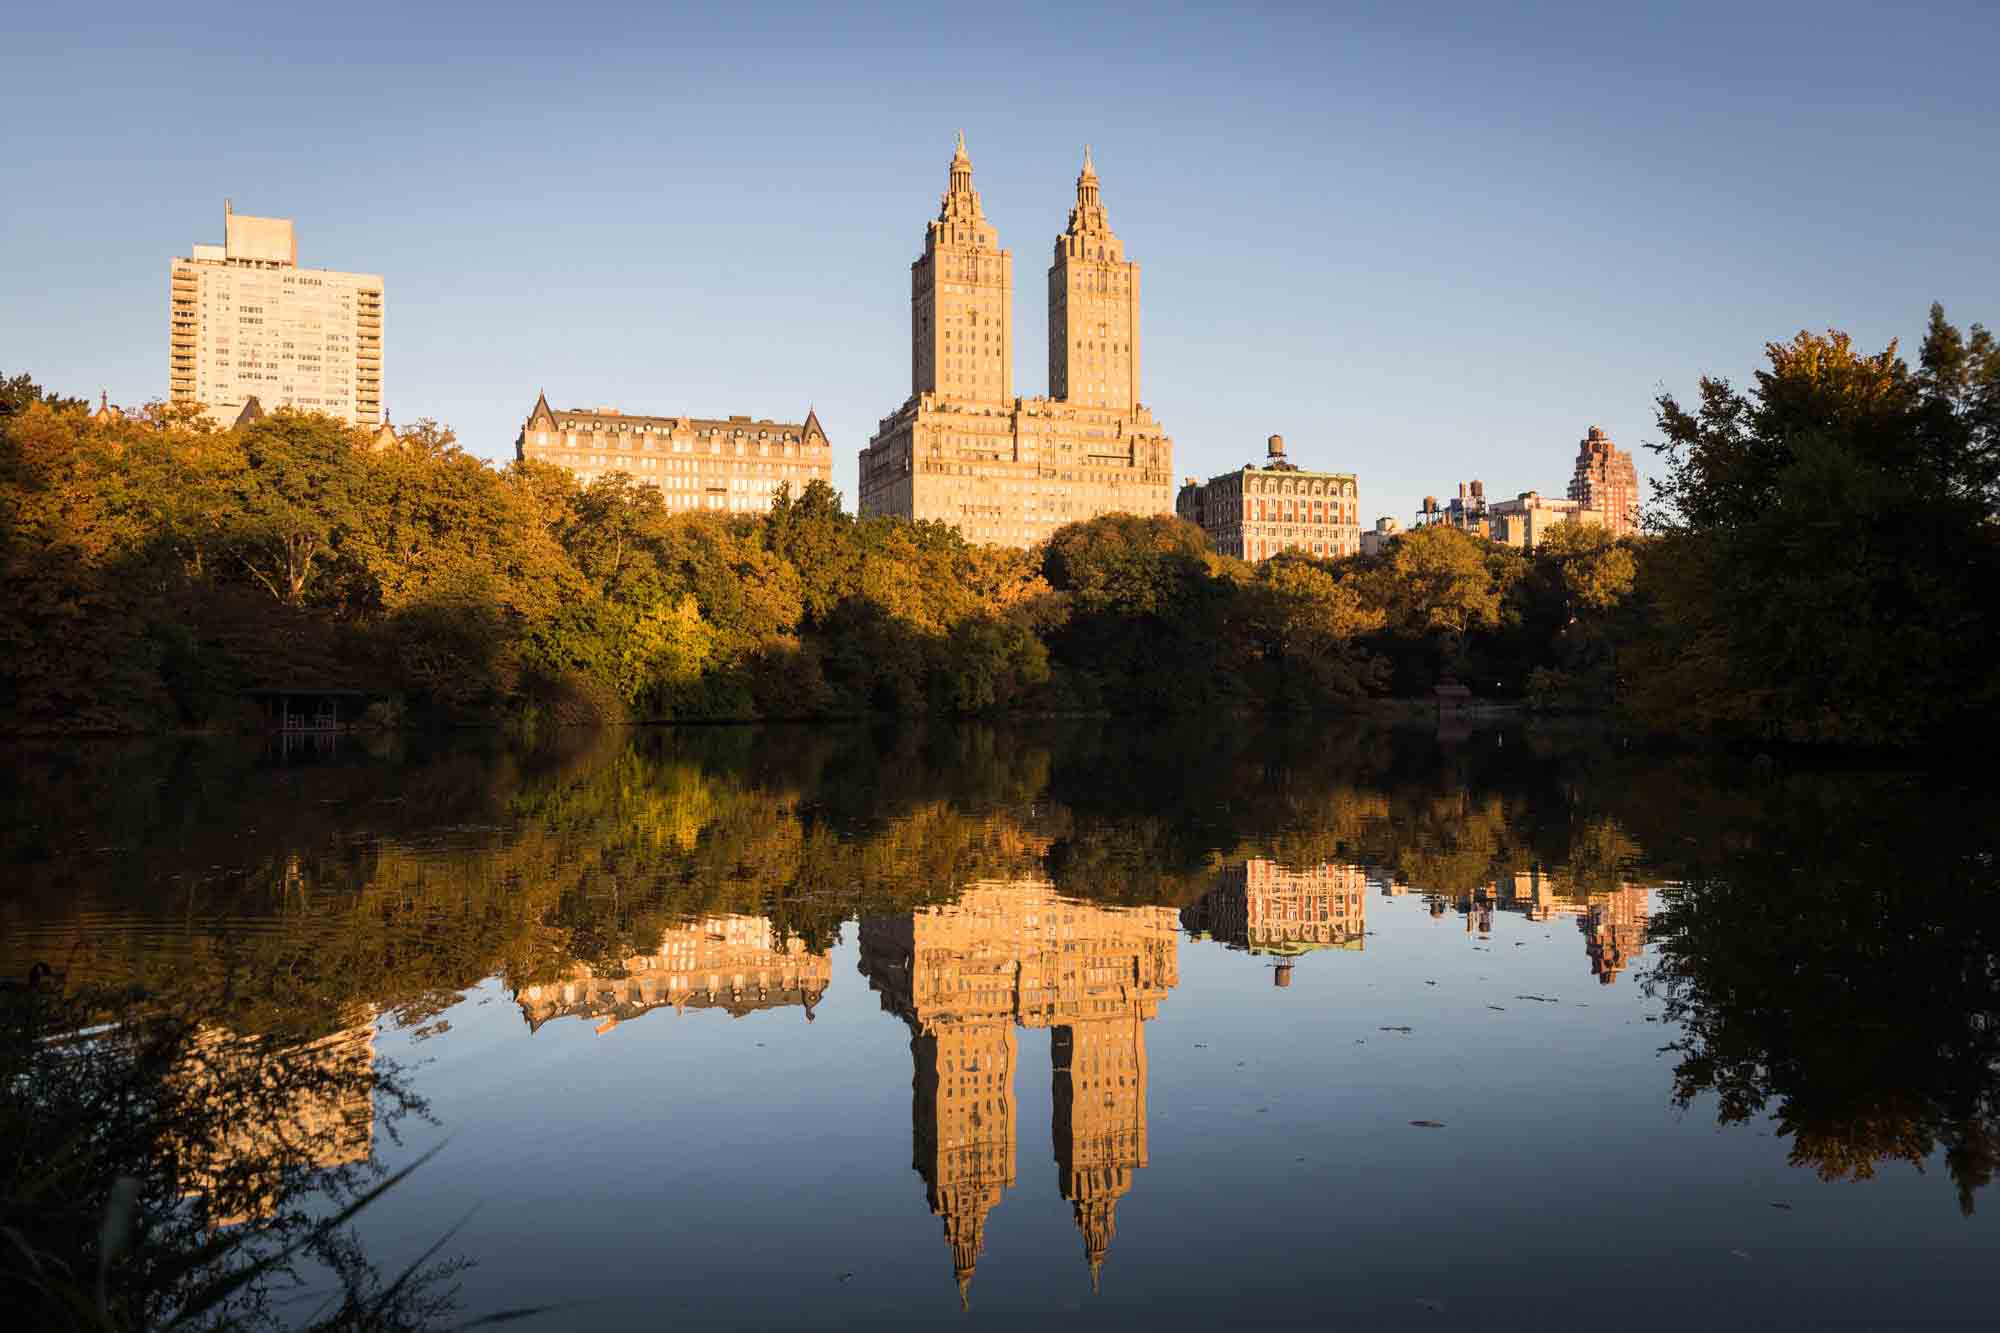 View over lake in Central Park with buildings in background at sunrise